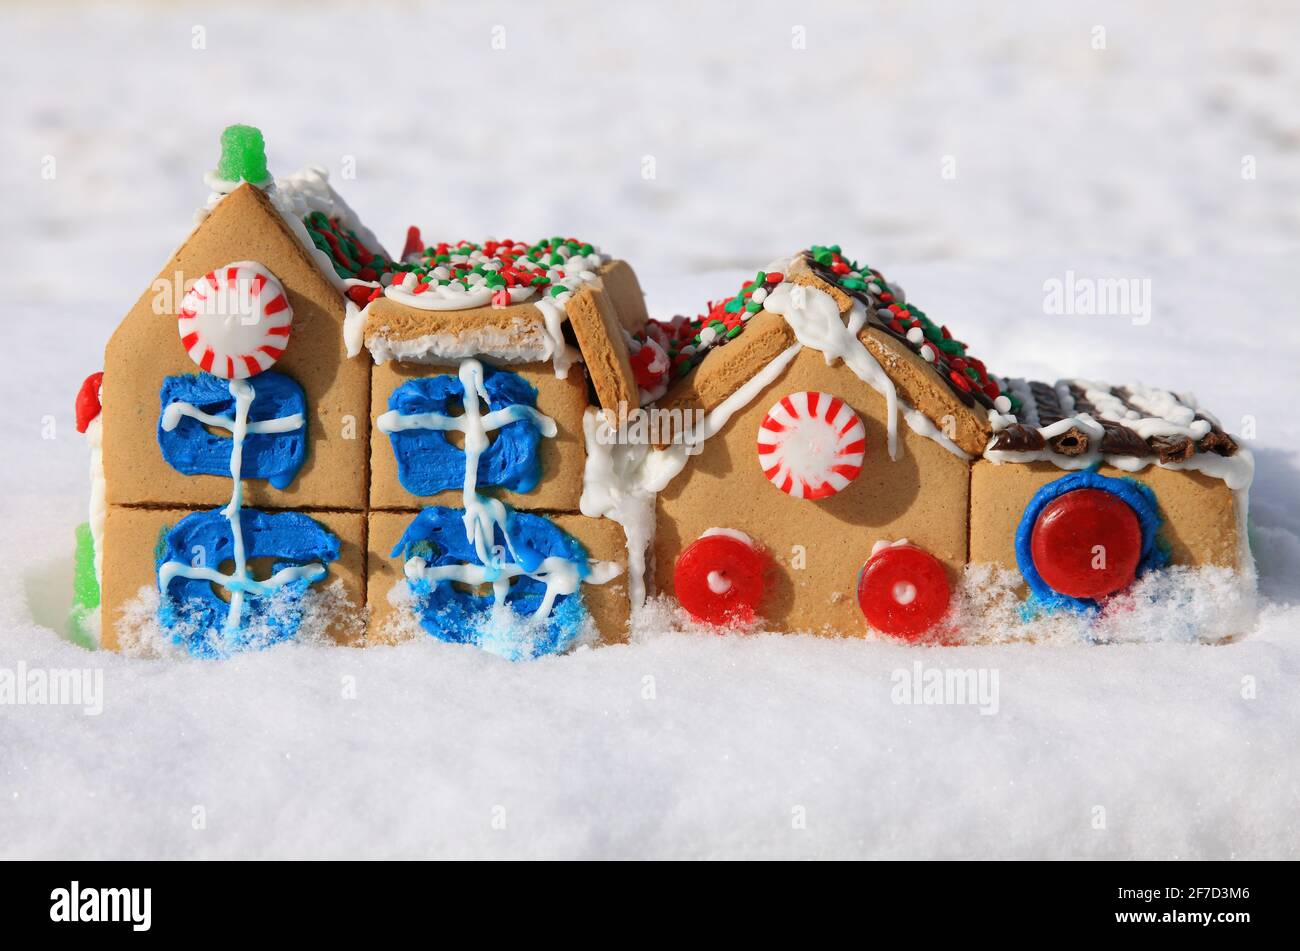 cute gingerbread house village in snow background with candy and icing Stock Photo